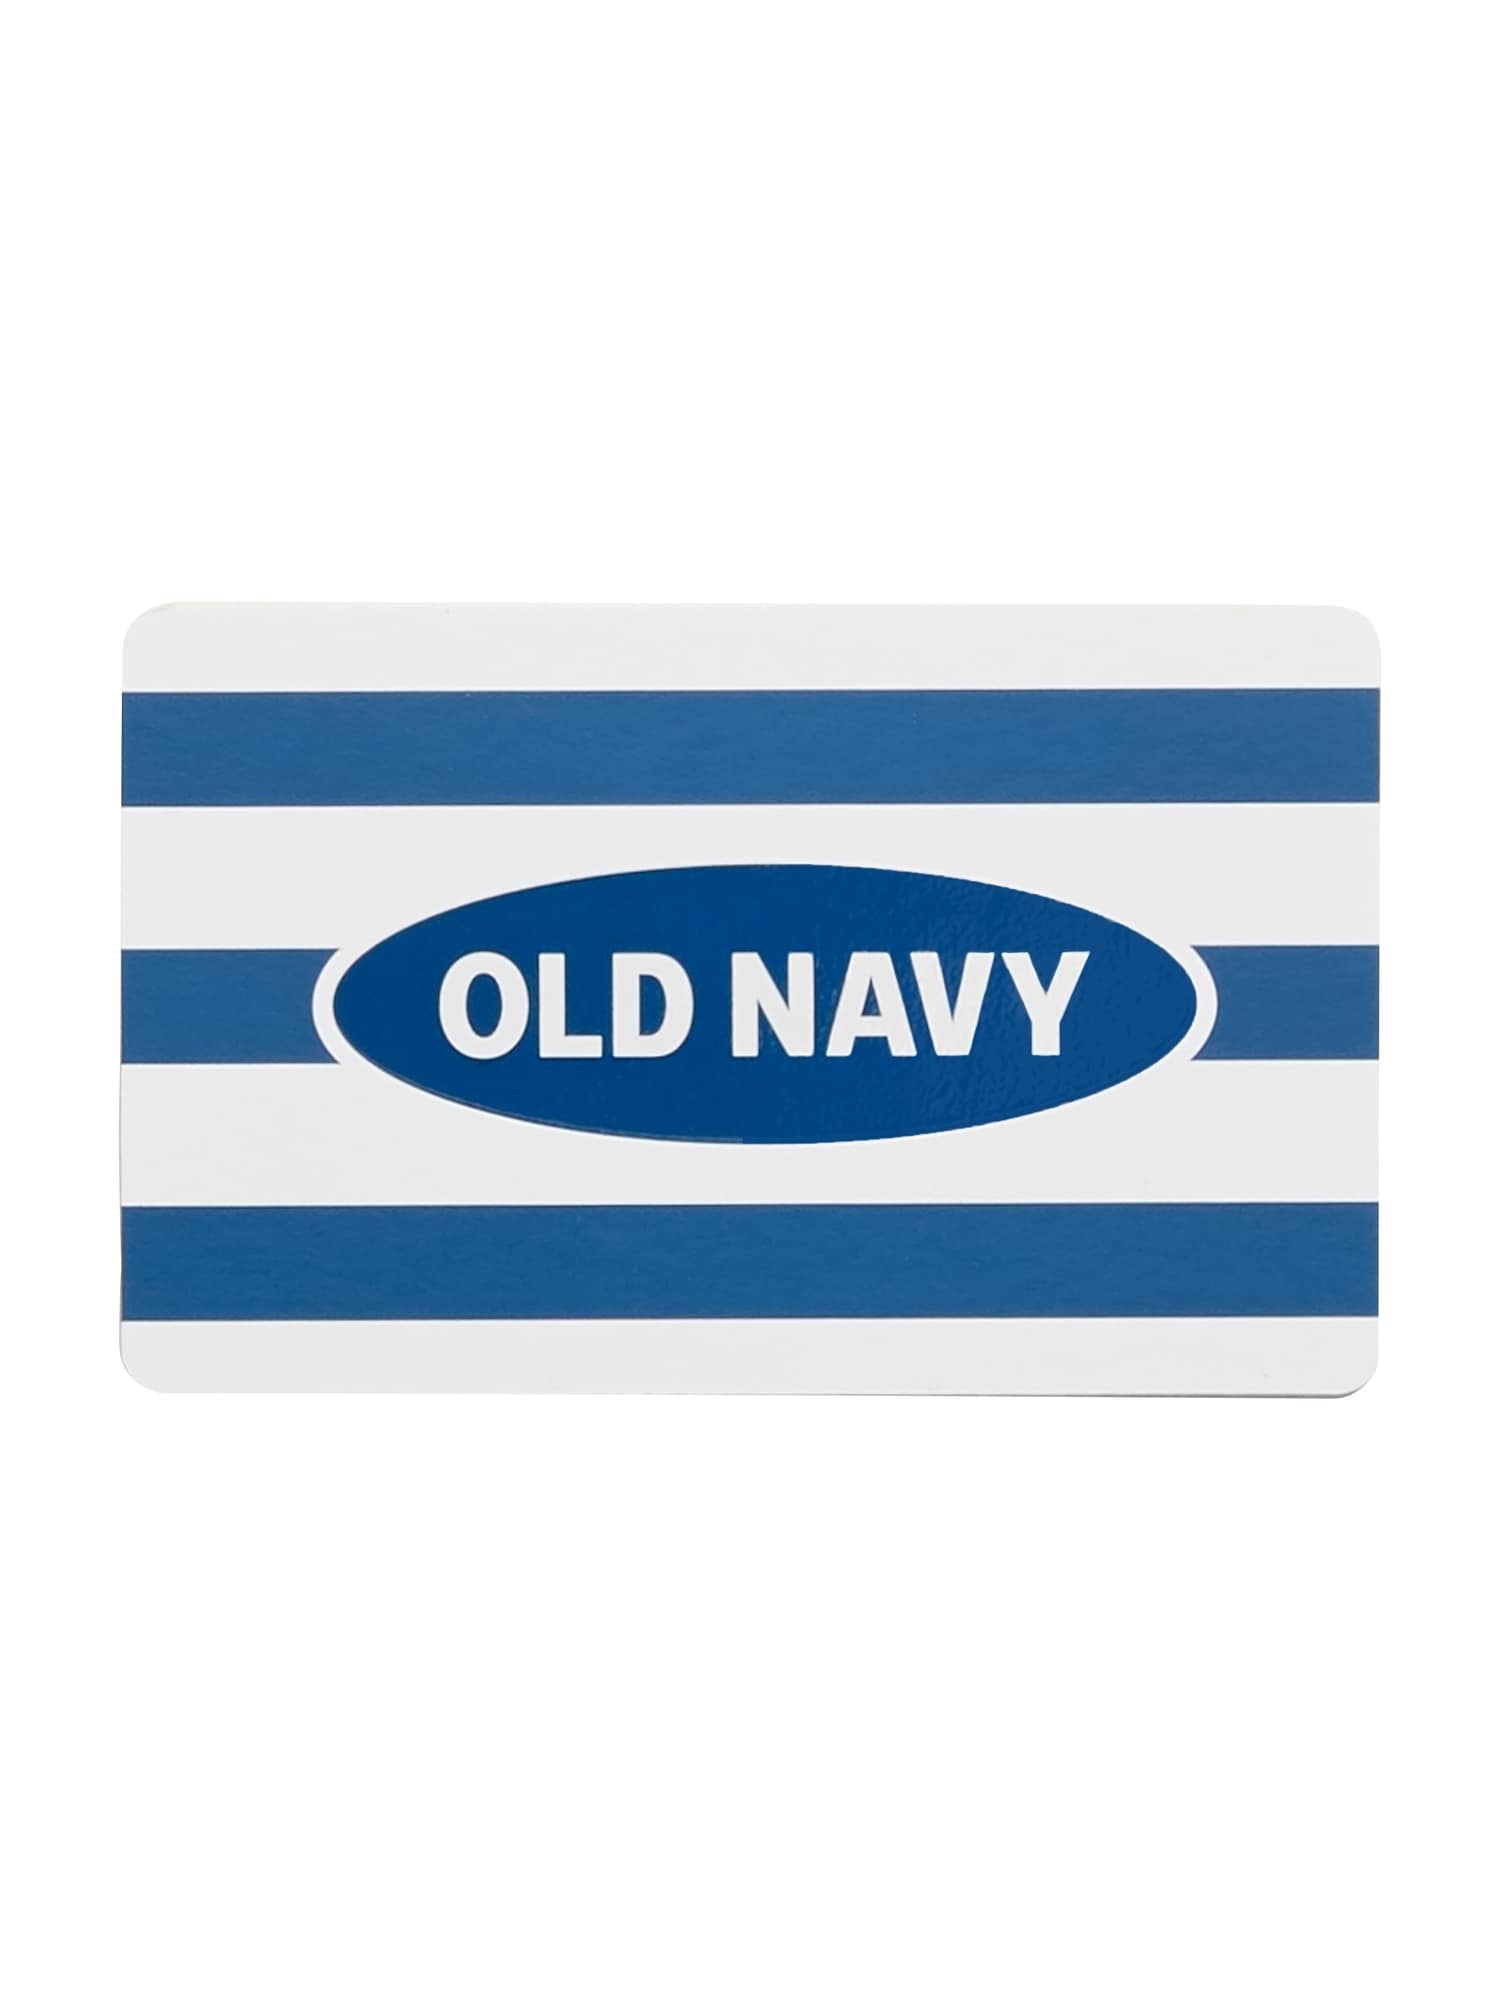 Old Navy Gift Card Old Navy - do purchased robux cards ever expire